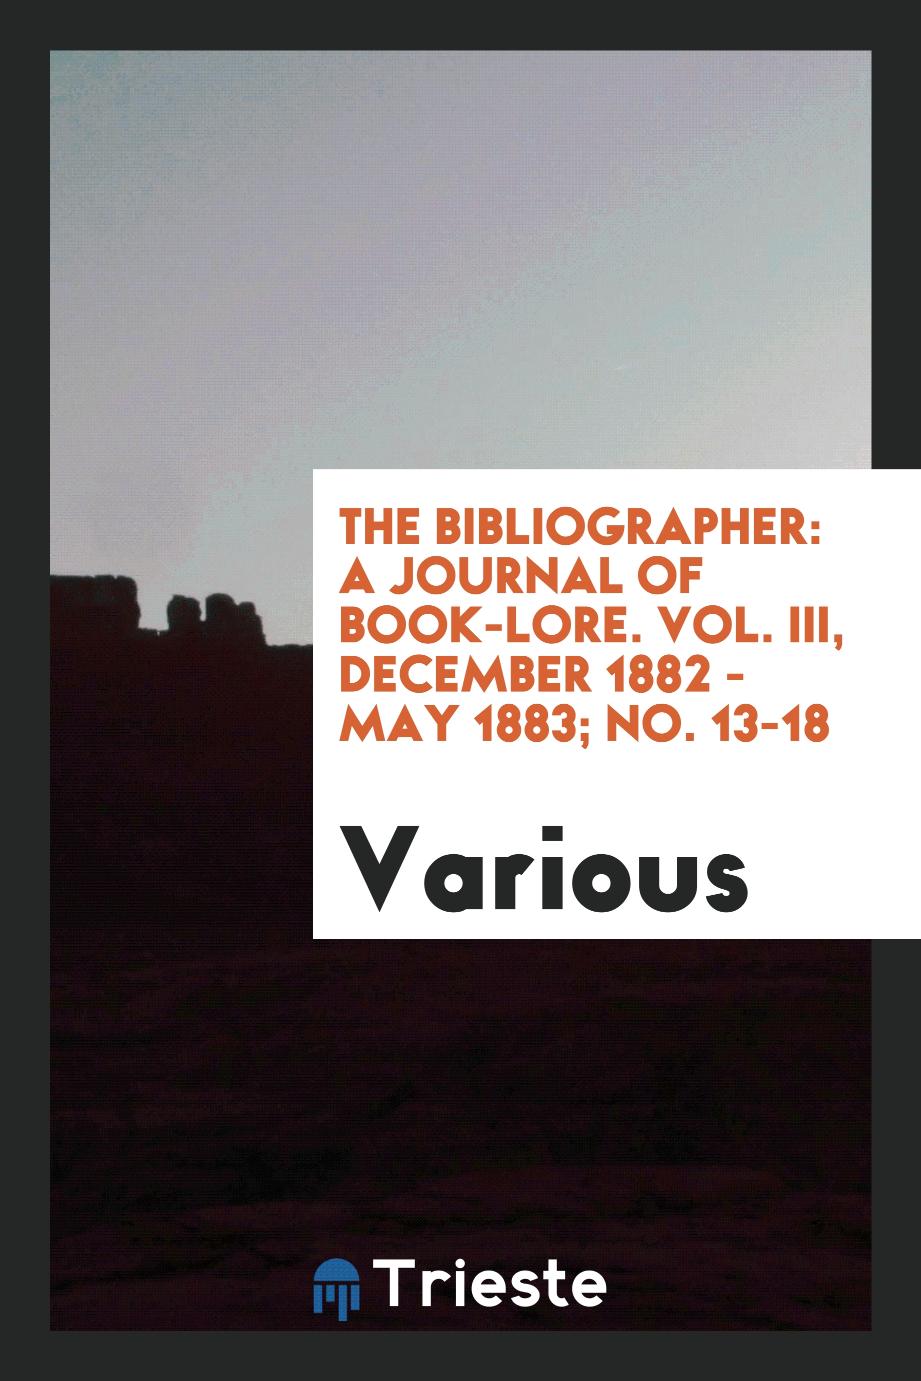 The Bibliographer: A Journal of Book-Lore. Vol. III, December 1882 - May 1883; No. 13-18